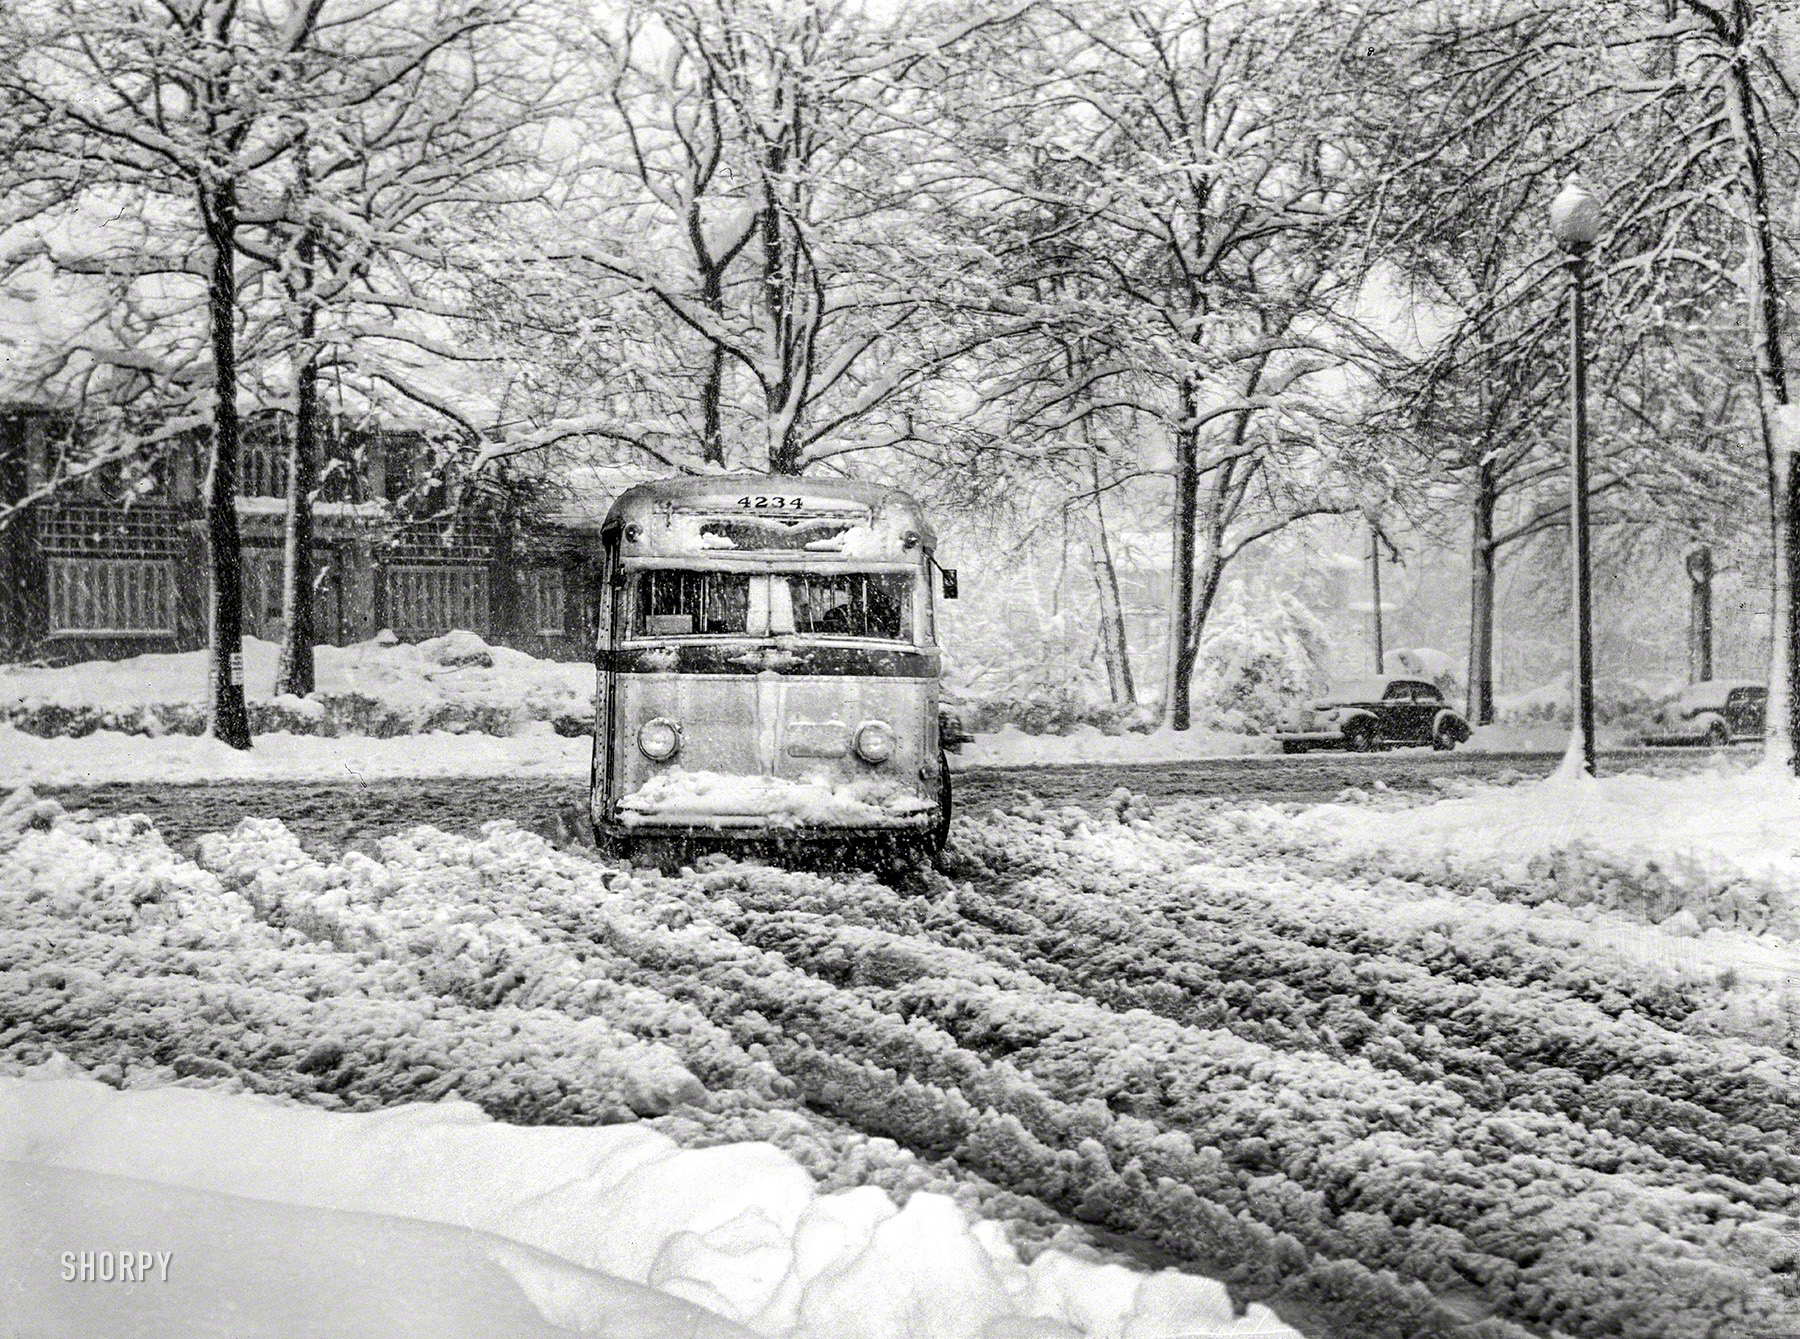 March 1942. Washington, D.C. "Bus going through the snow near Connecticut Avenue and Chevy Chase Circle." No one ever moved to Washington for the weather! Photo by John Ferrell for the Office of War Information. View full size.